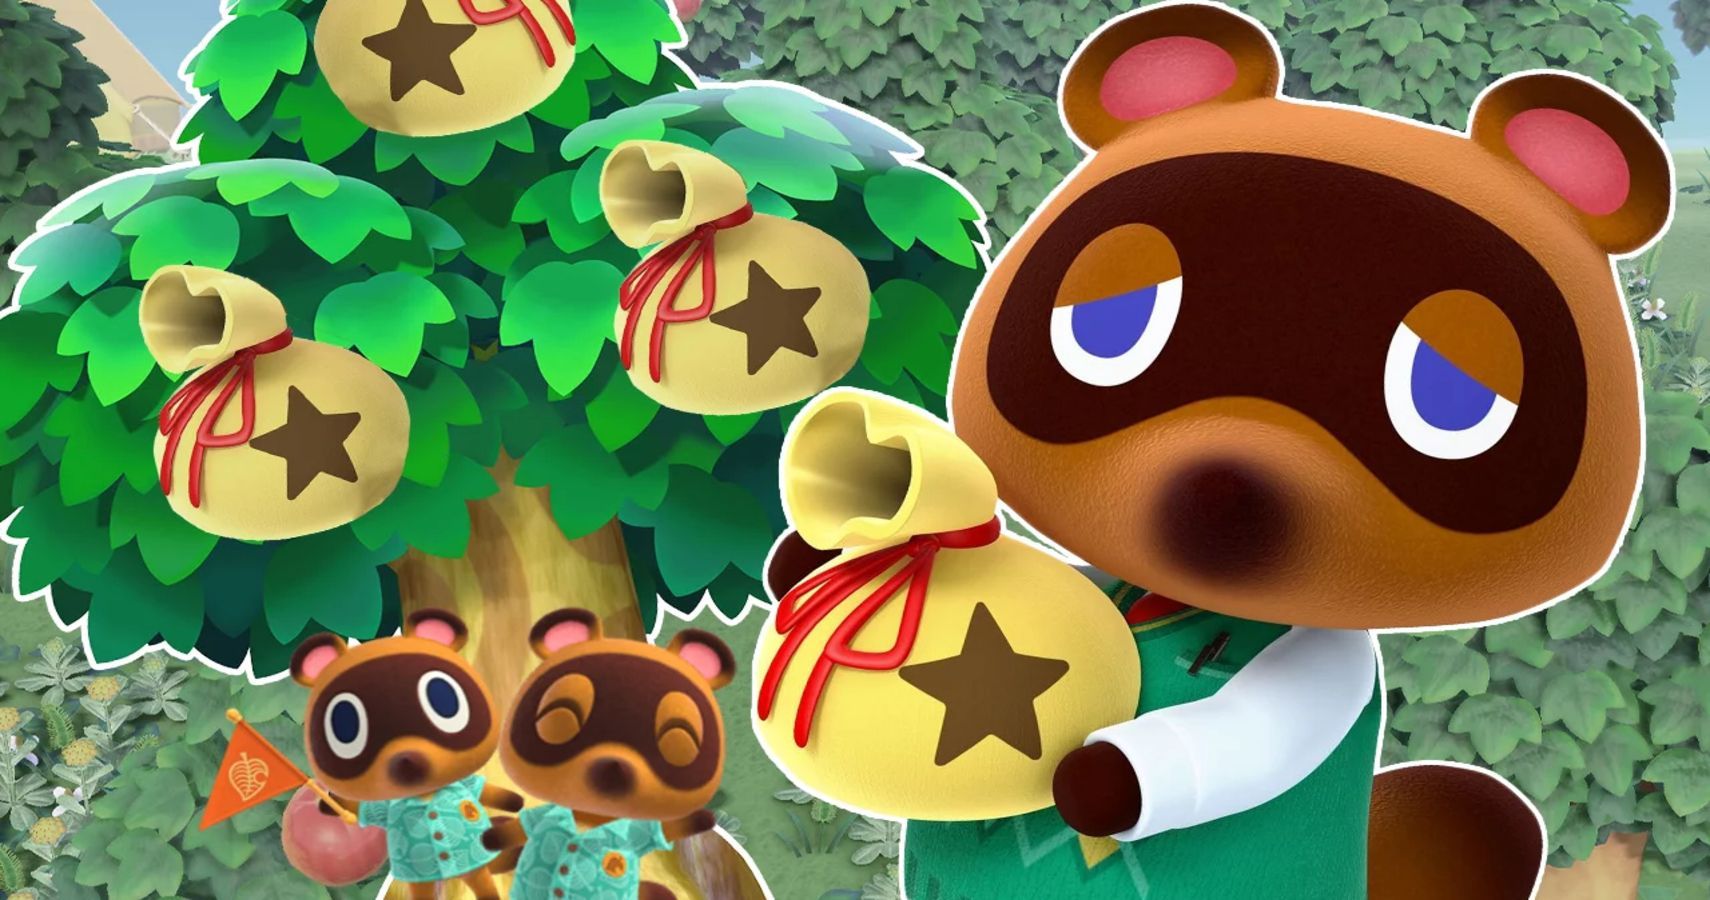 Physical Sales of Animal Crossing: New Horizons Surpass Mario Kart 8 As Best-Selling Game For The Nintendo Switch in Japan